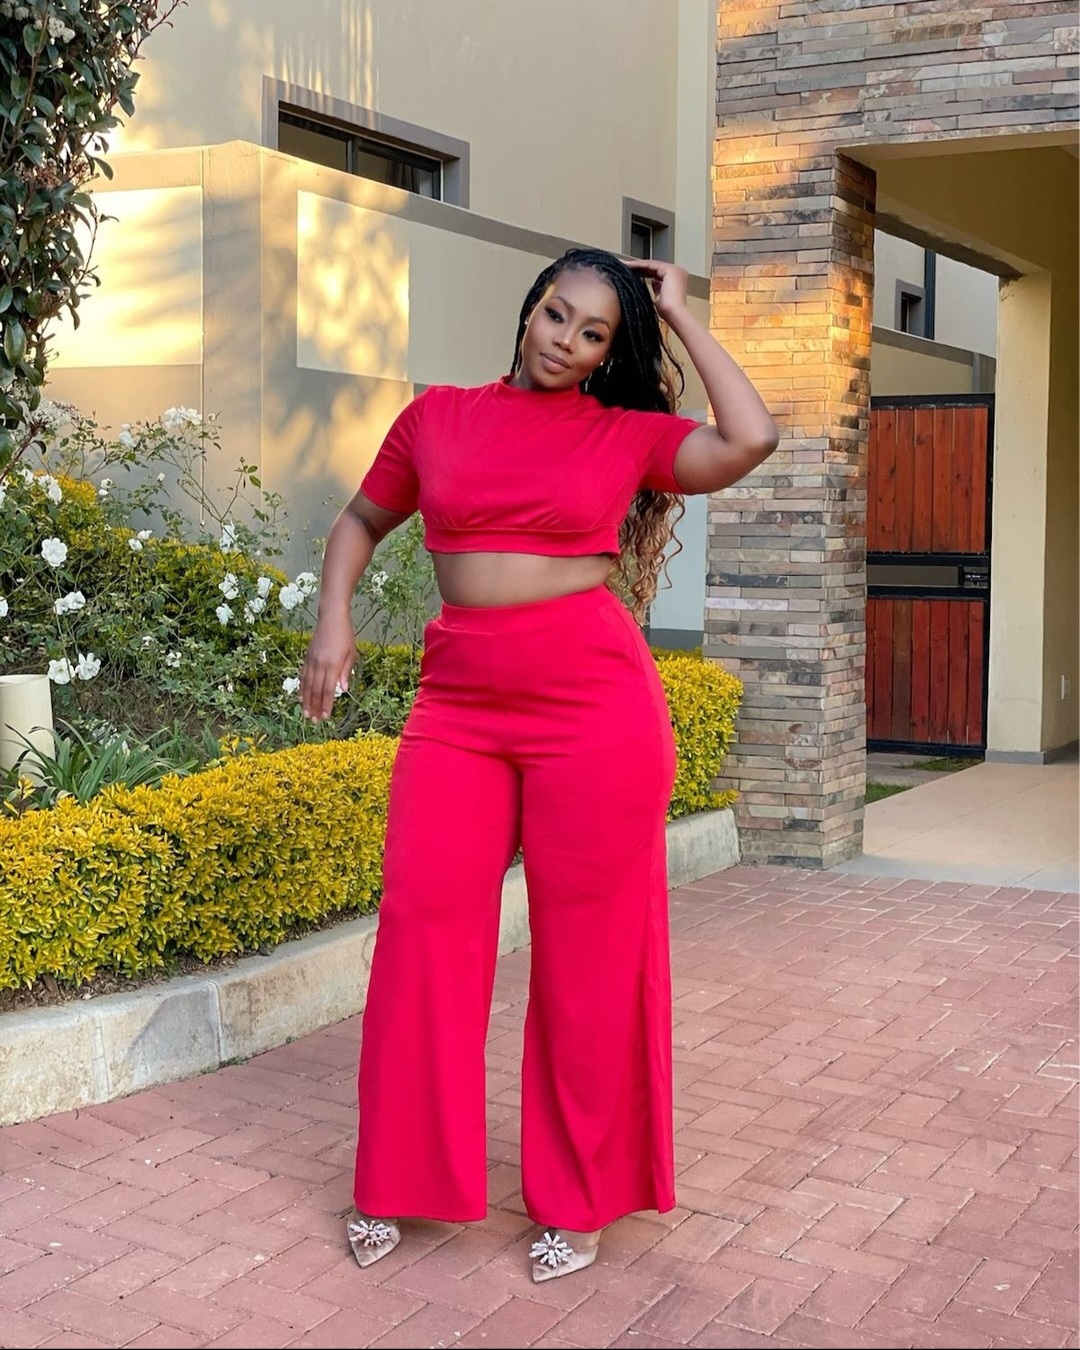 STYLING PLUS SIZE PALAZZO PANTS FOR SUMMER - Stephanie Yeboah